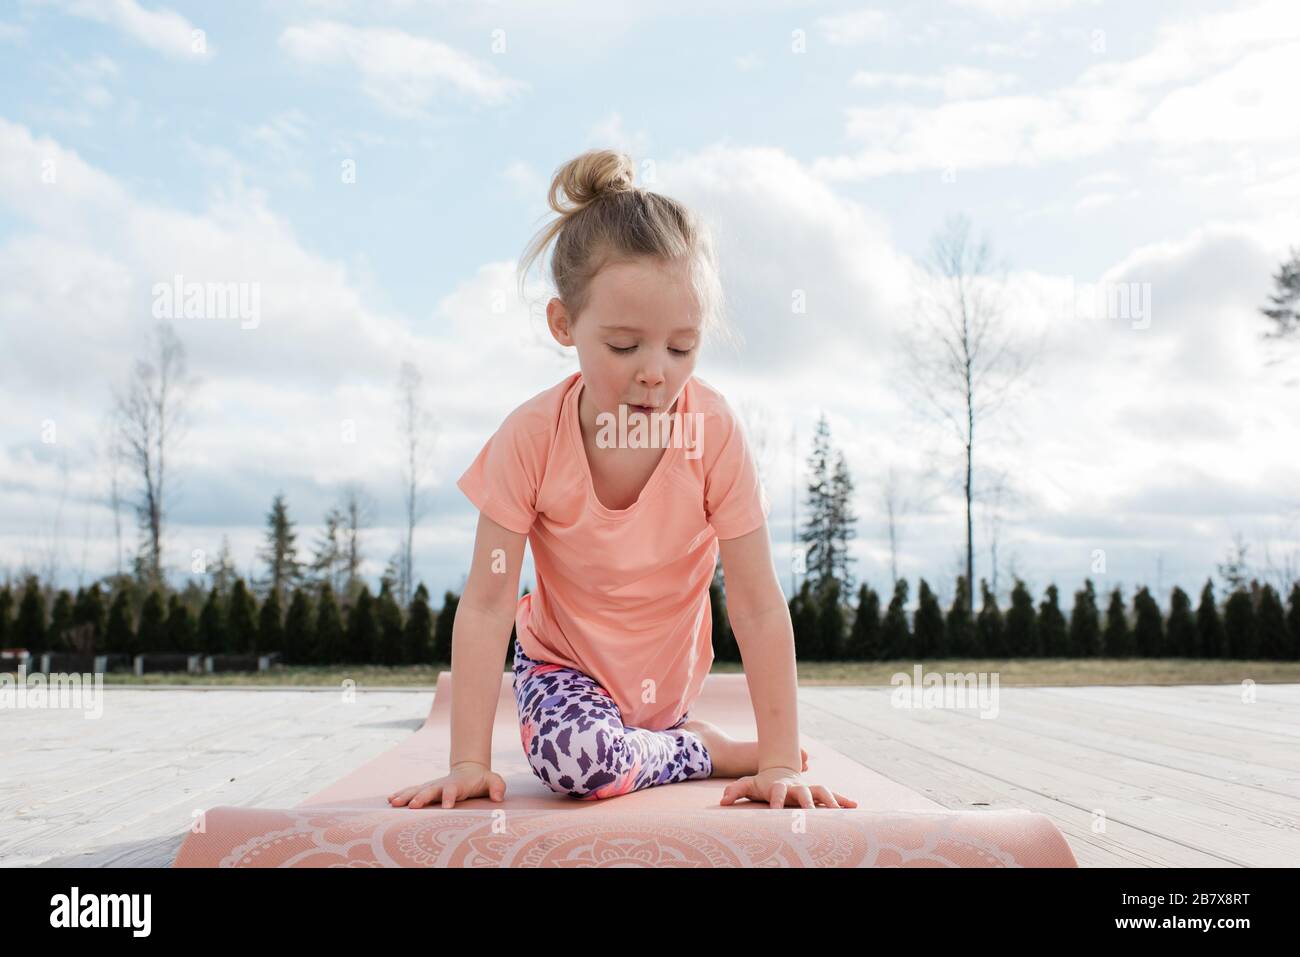 Thorough Stretching. Little Girl Is Lying On The Floor And Doing Stretching  Exercises Stock Photo, Picture and Royalty Free Image. Image 49593284.